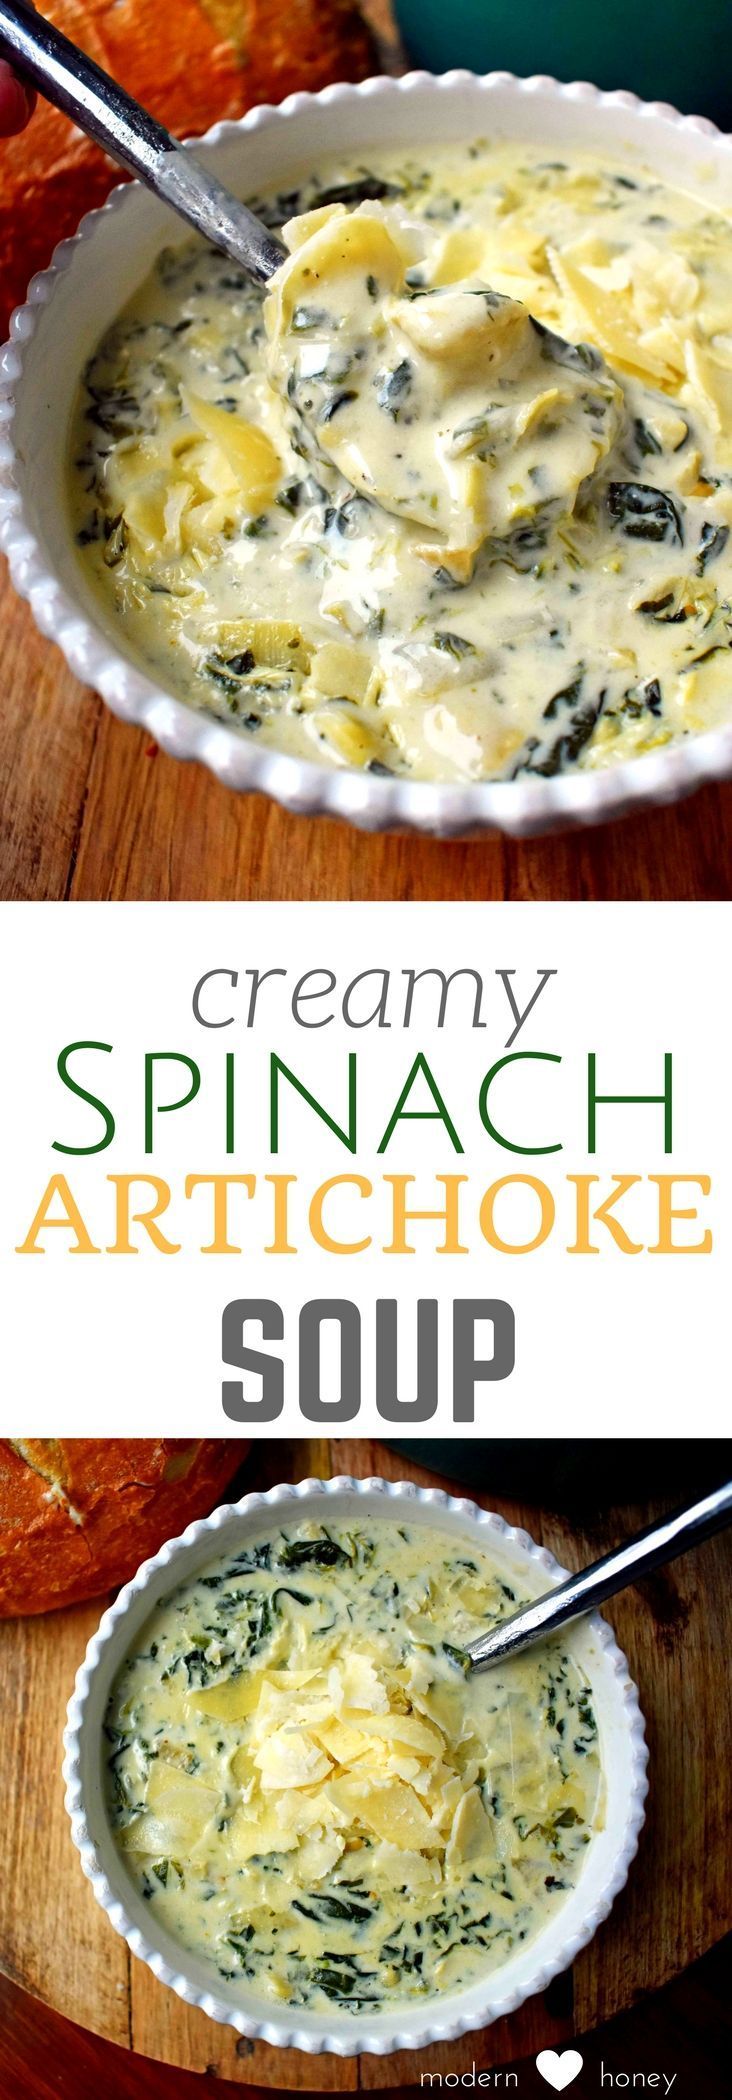 Creamy Spinach Artichoke Soup. The popular dip made into a soup. Rich parmesan cream broth, spinach, artichokes, and spices make this the perfect soup for a cold winter's day. Can be made in the crockpot too. -   20 spinach recipes crockpot
 ideas